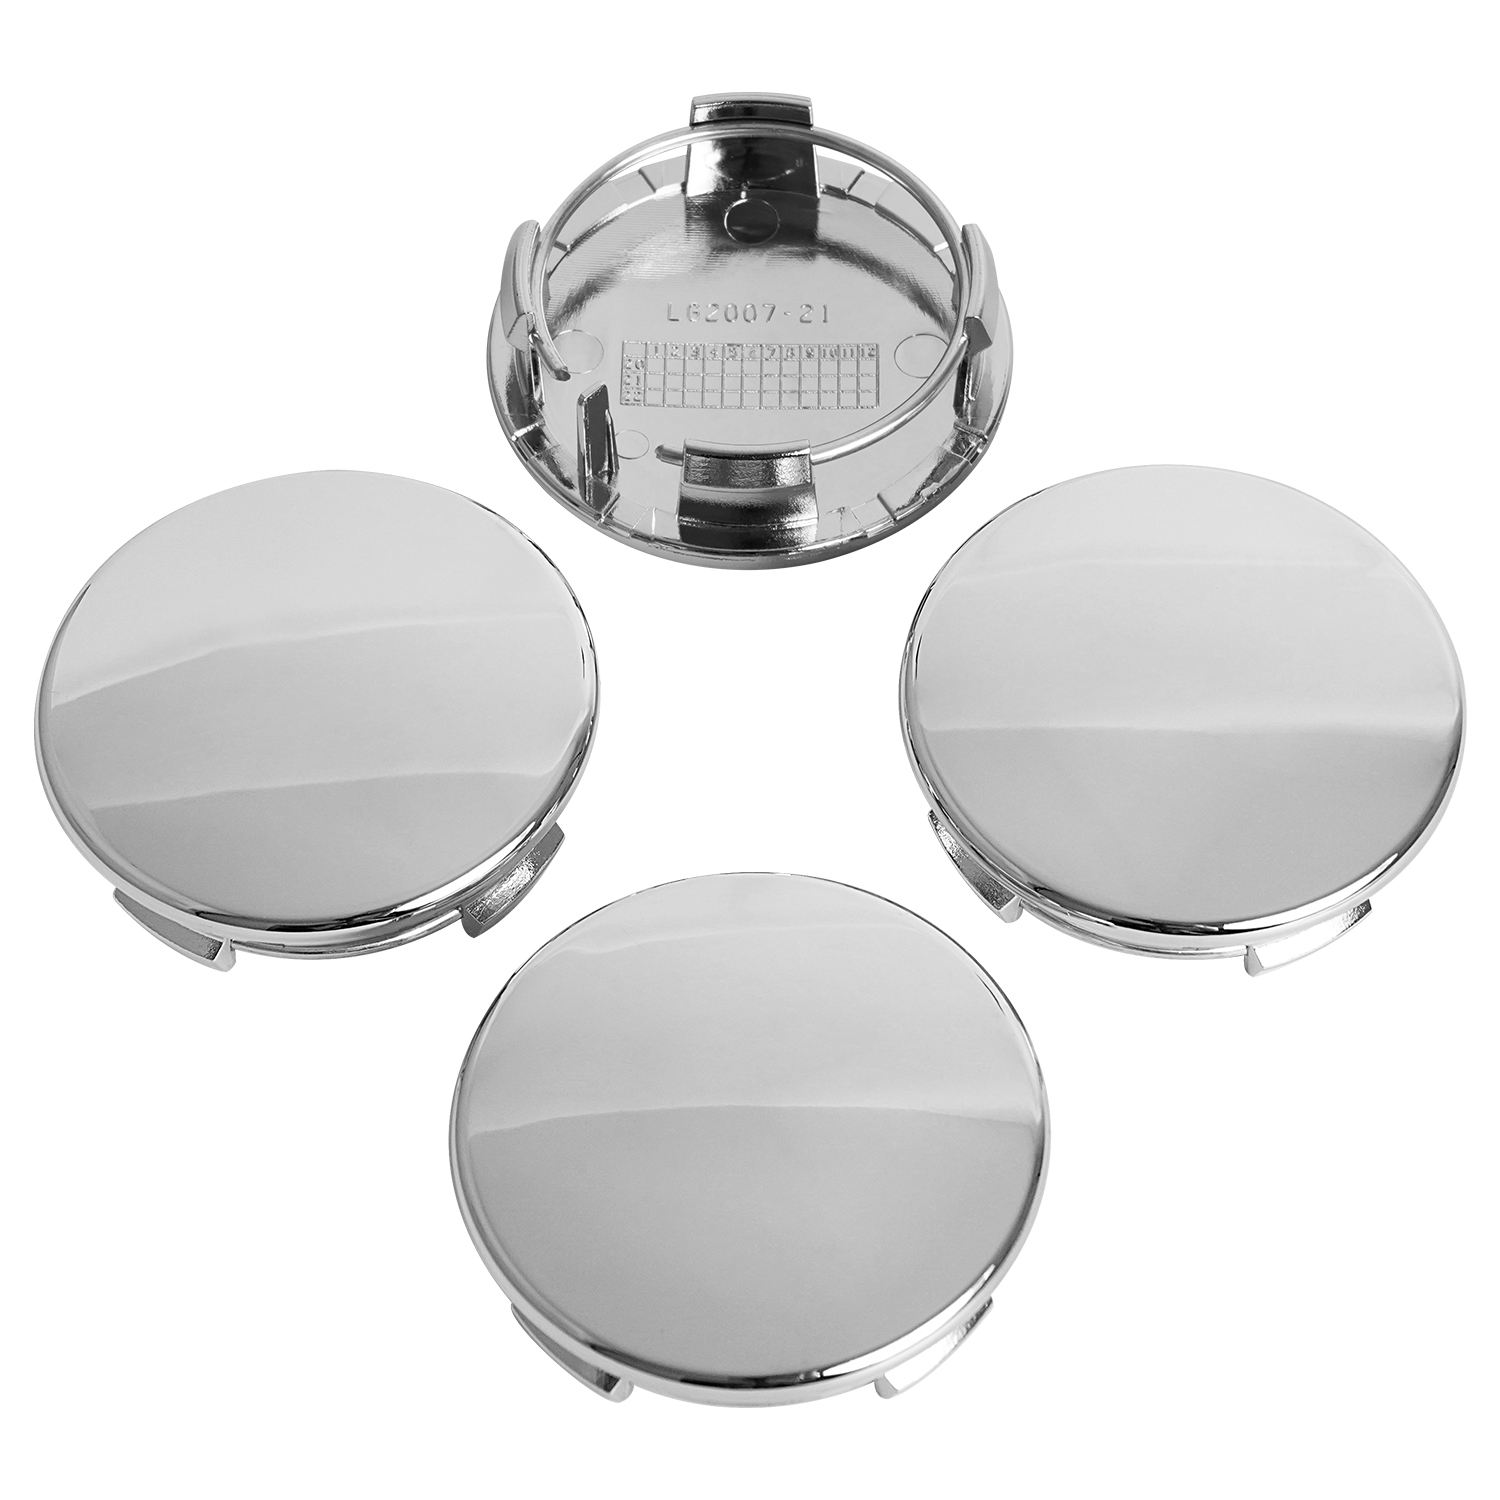 KitsPro 2.3Inch 59MM Wheel Center Caps for Chevrolet Chevy Cruze Equinox Impala Malibu Rim Hub Caps Pack of 4 Silver, Outer 59MM , Inner 46MM 